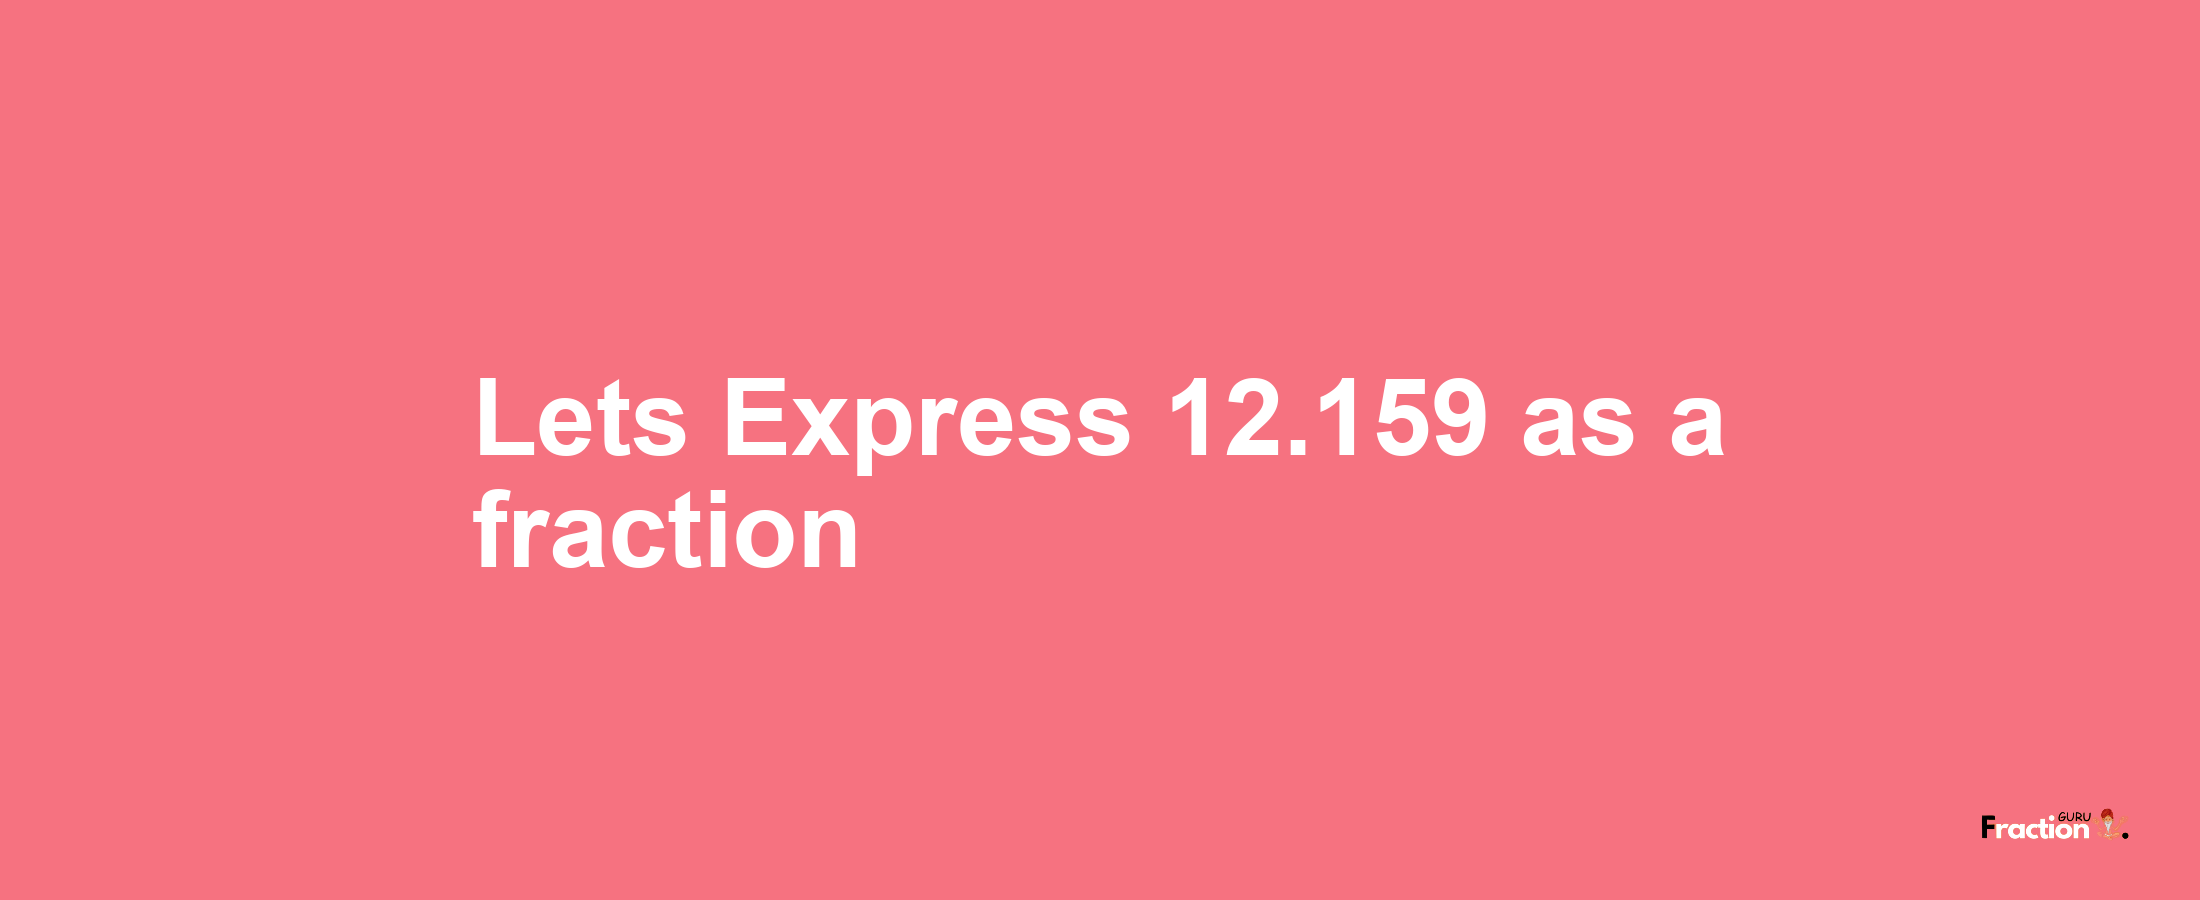 Lets Express 12.159 as afraction